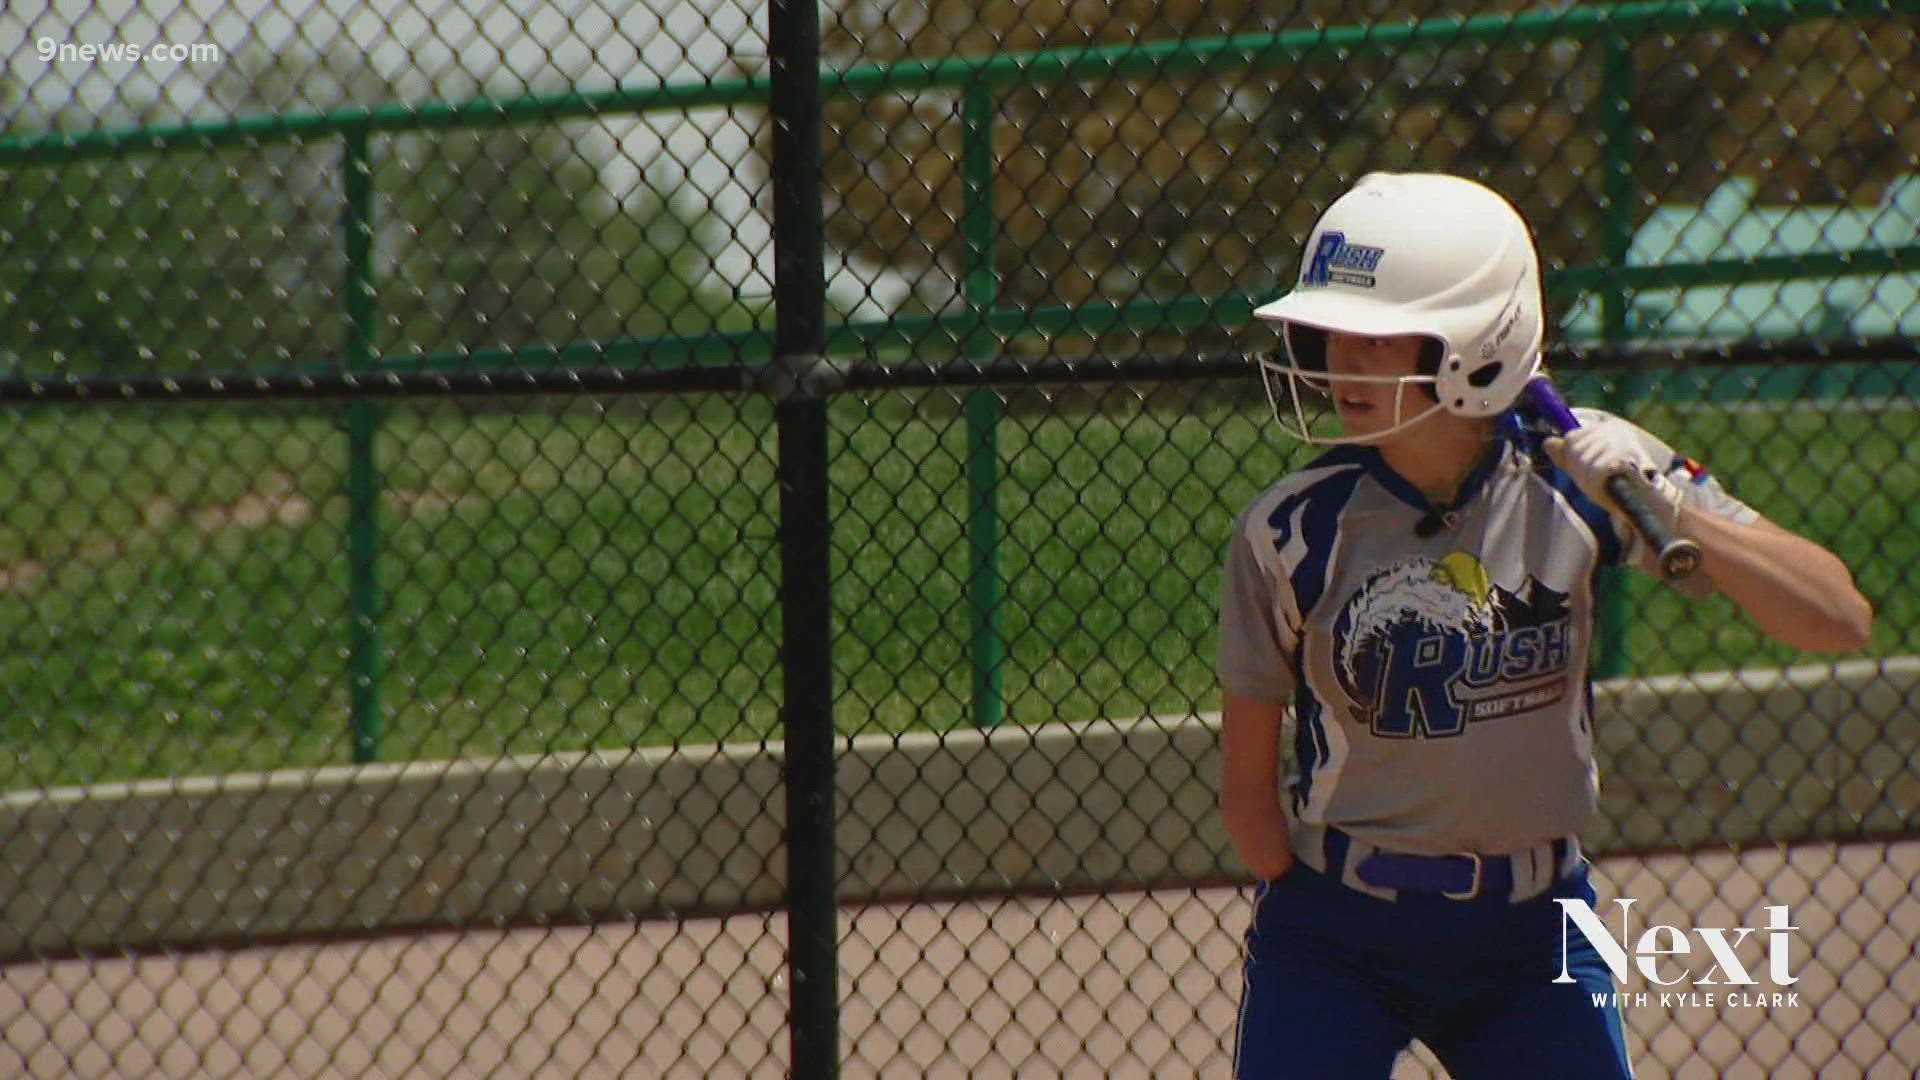 Softball is usually thought of as a two-handed sport, but Devyn Priselac in Fort Collins has just one. Her story is one of adaptation, determination and generosity.